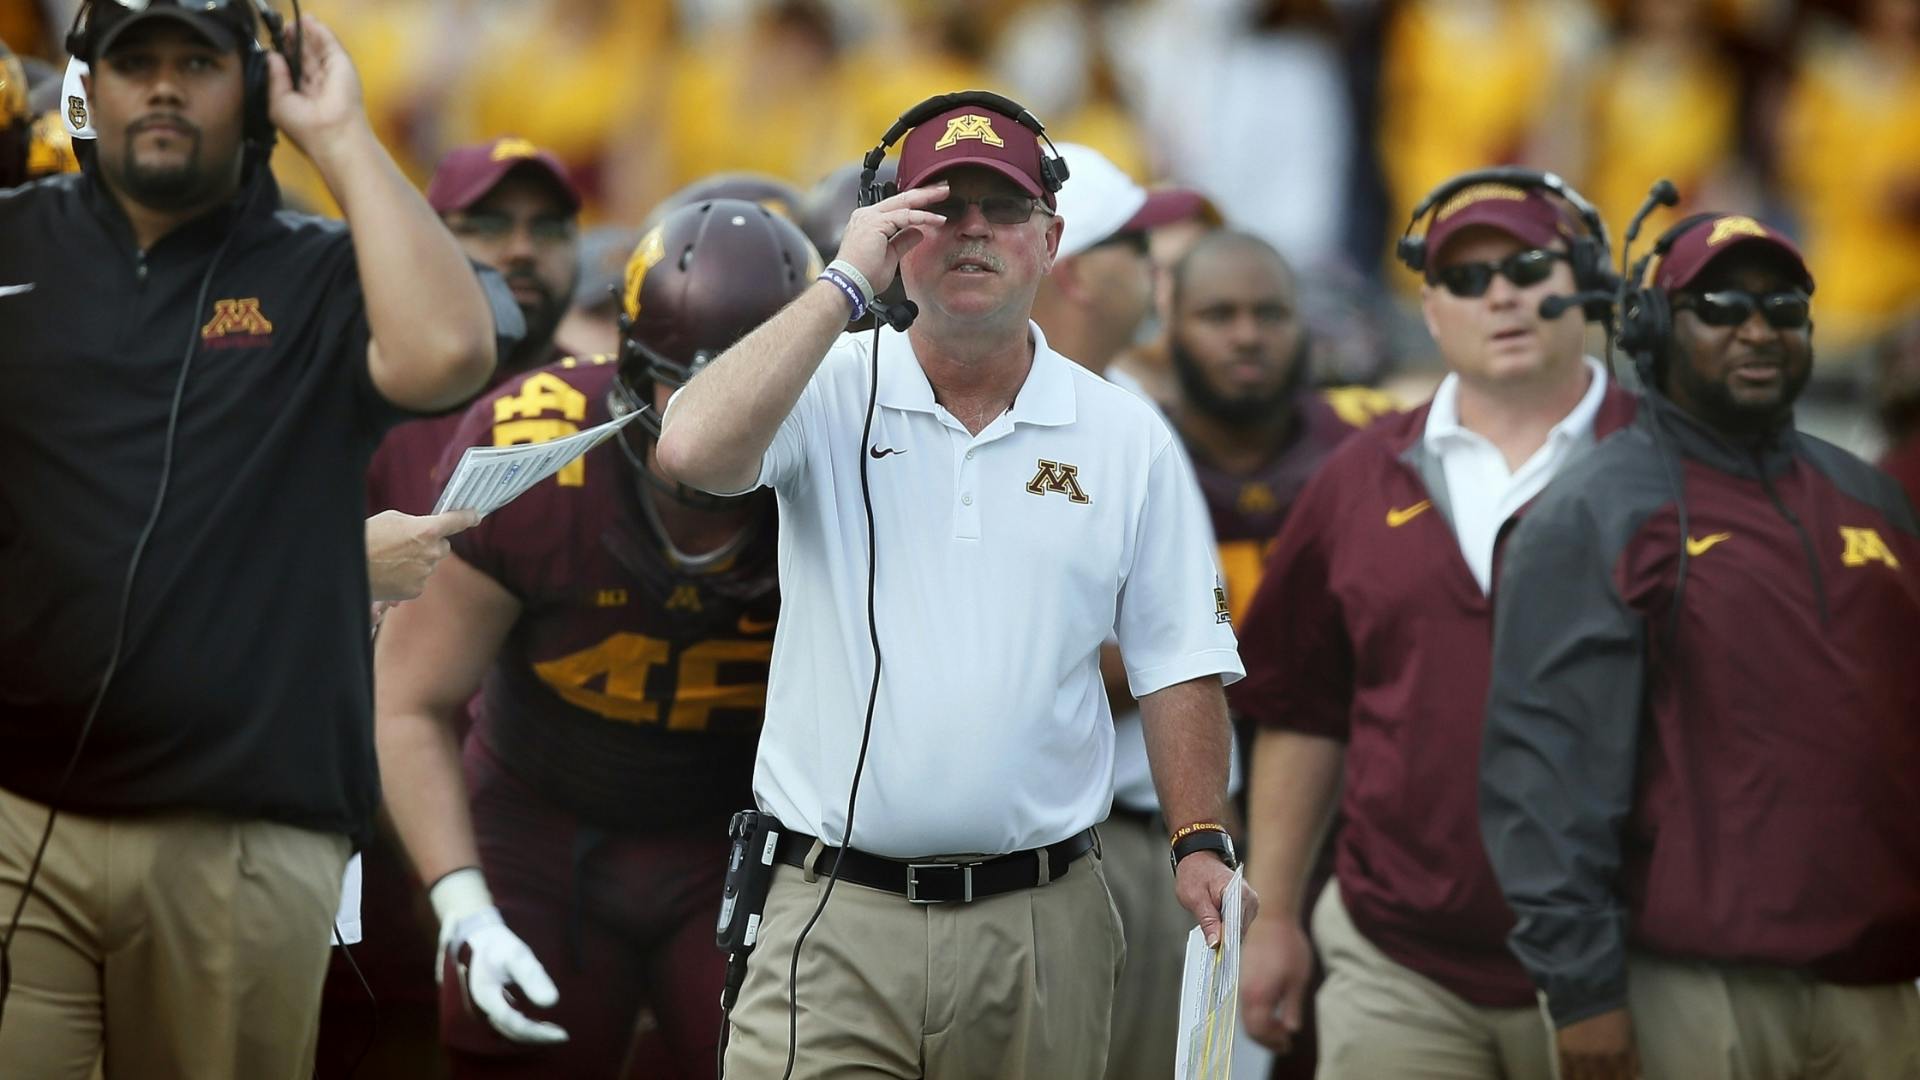 Gophers coach Jerry Kill spoke with the media following Thursday's spring practice.